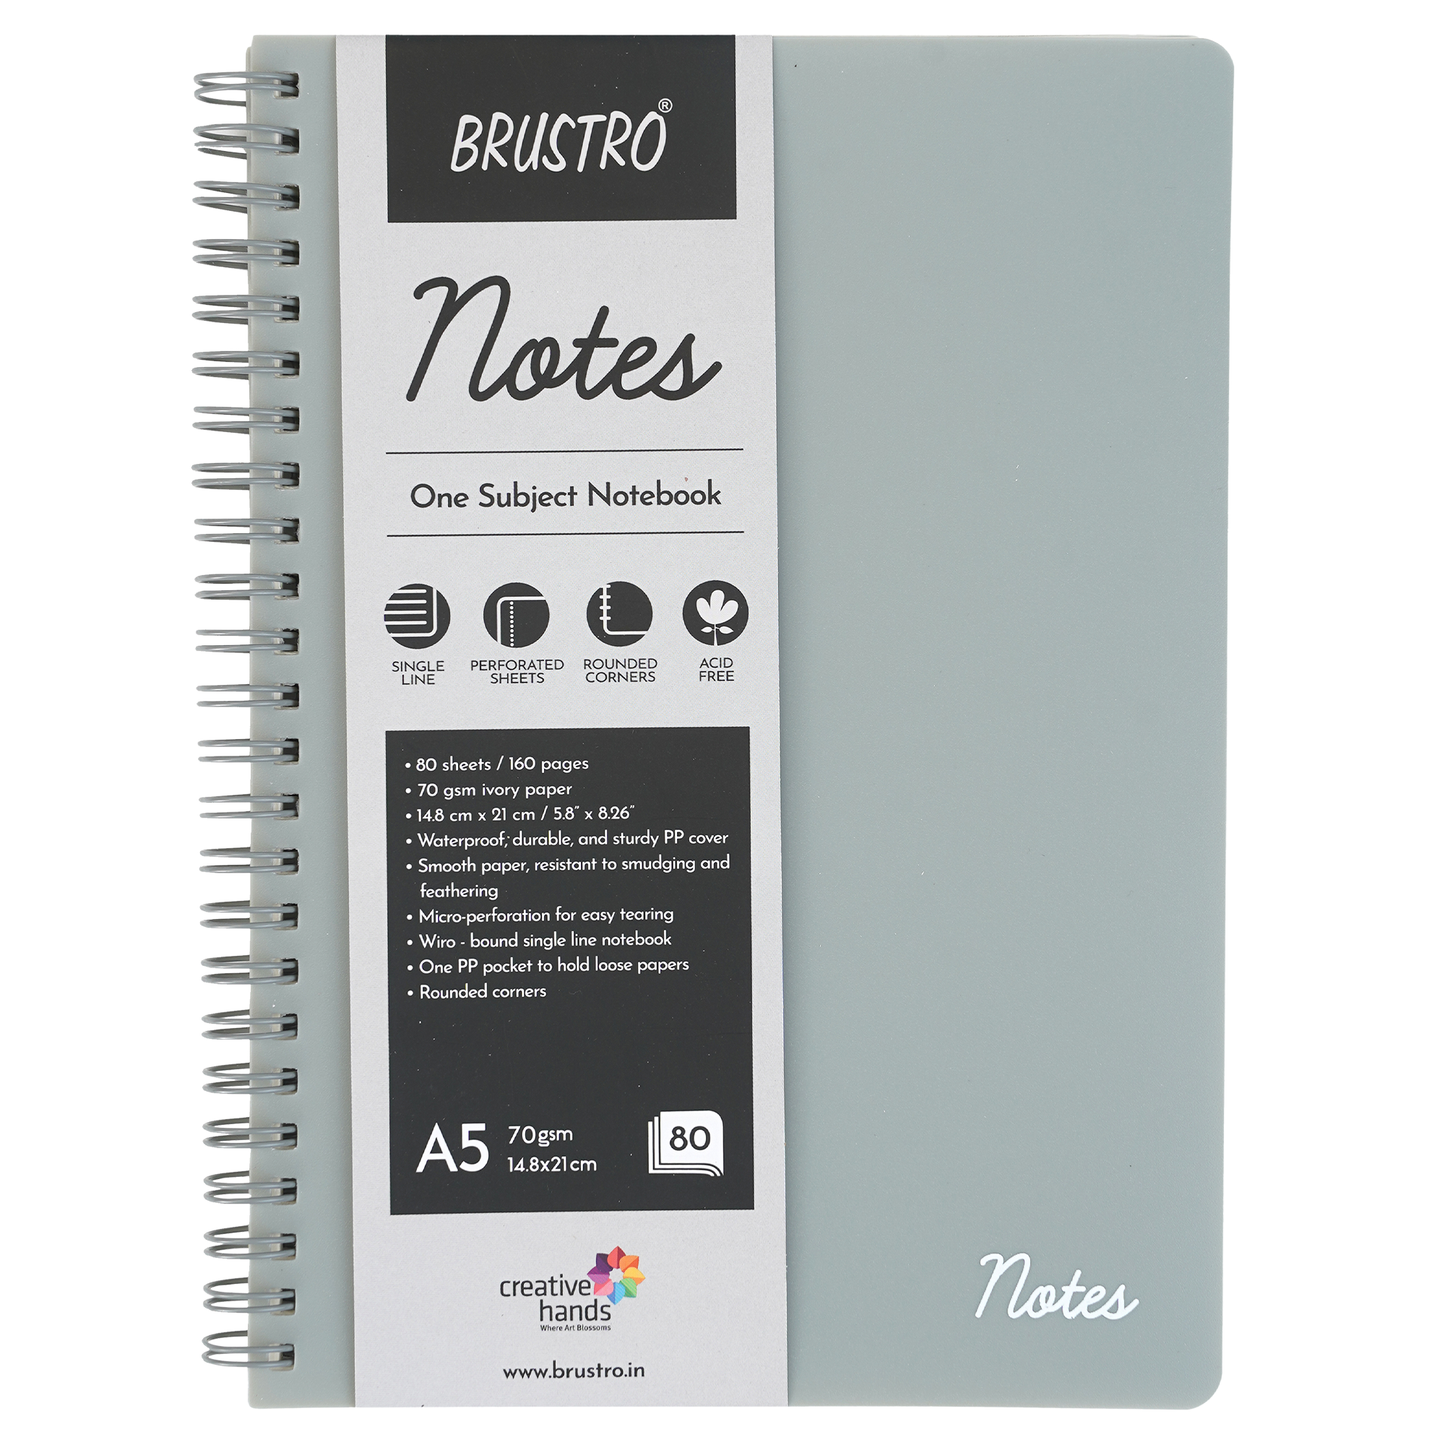 BRUSTRO Notes A5 Size, 1 Subject Ruled Notebook, 80 sheets / 160 pages, 70 gsm Ivory paper, Slate Cover